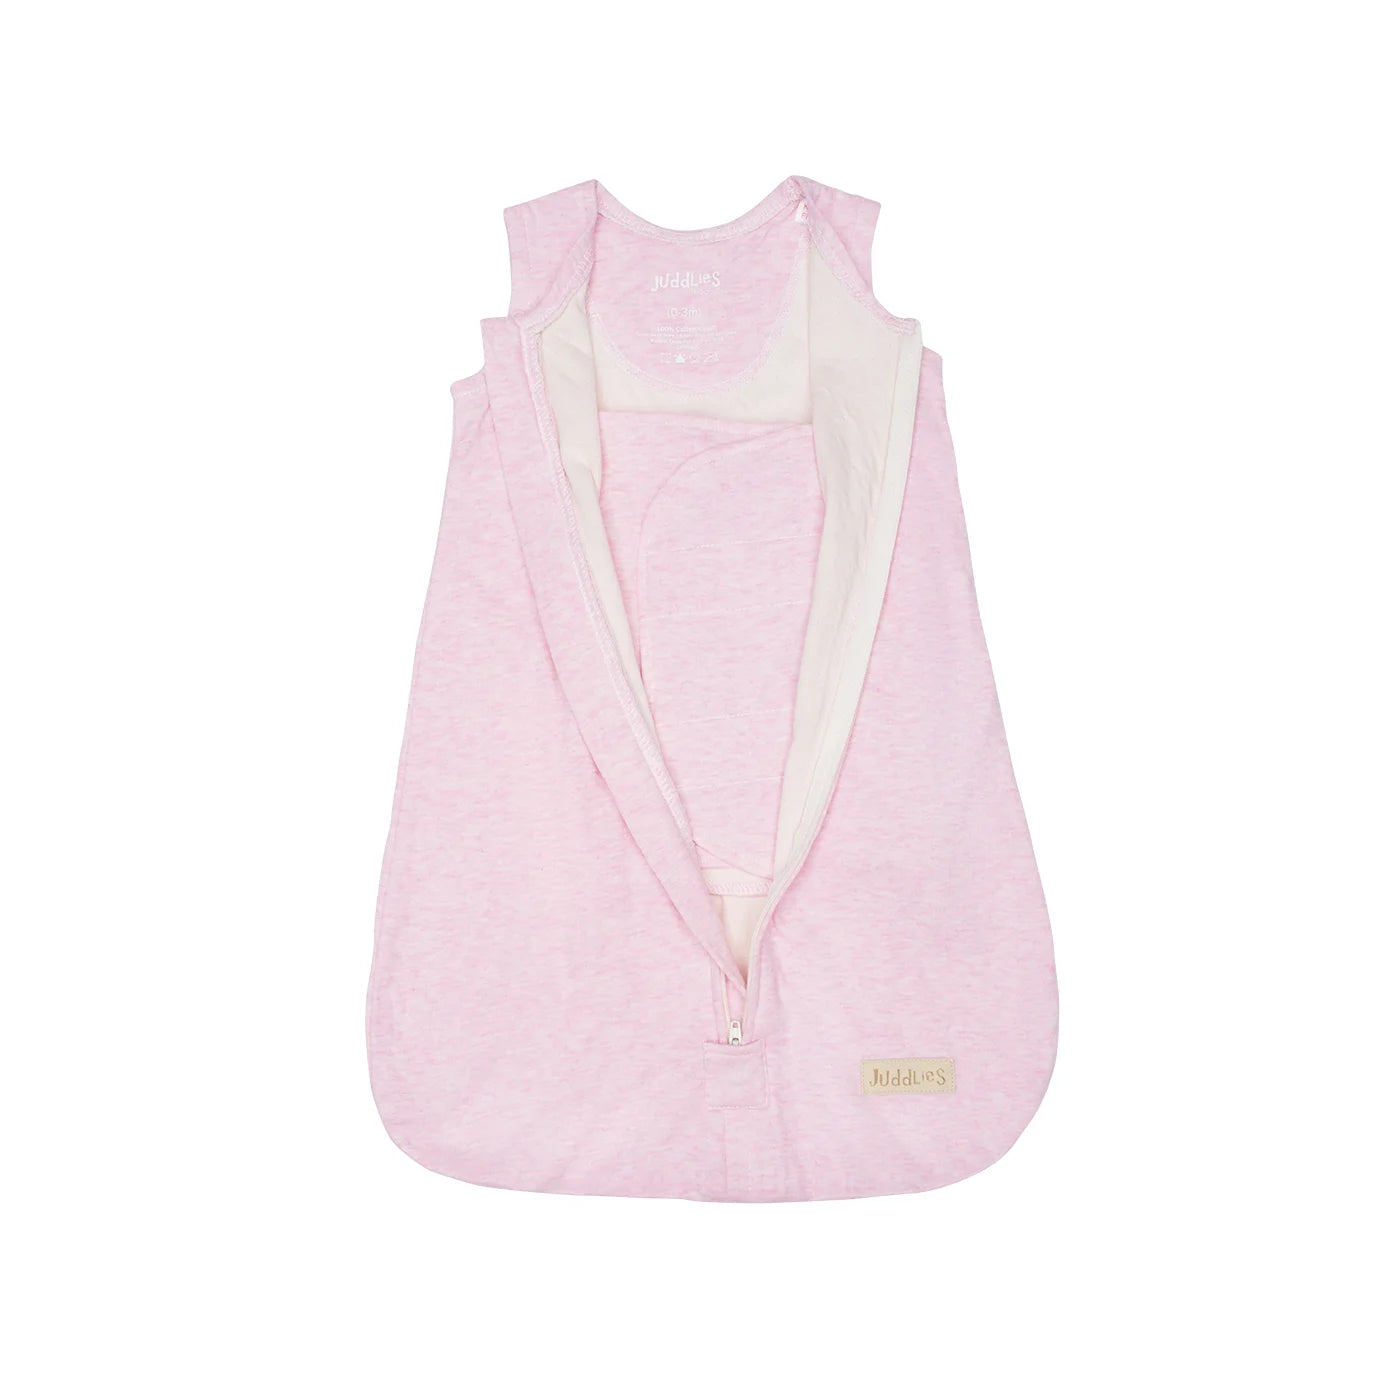 Breathe EZE Collection | Baby Dream Swaddle: Pink Fleck